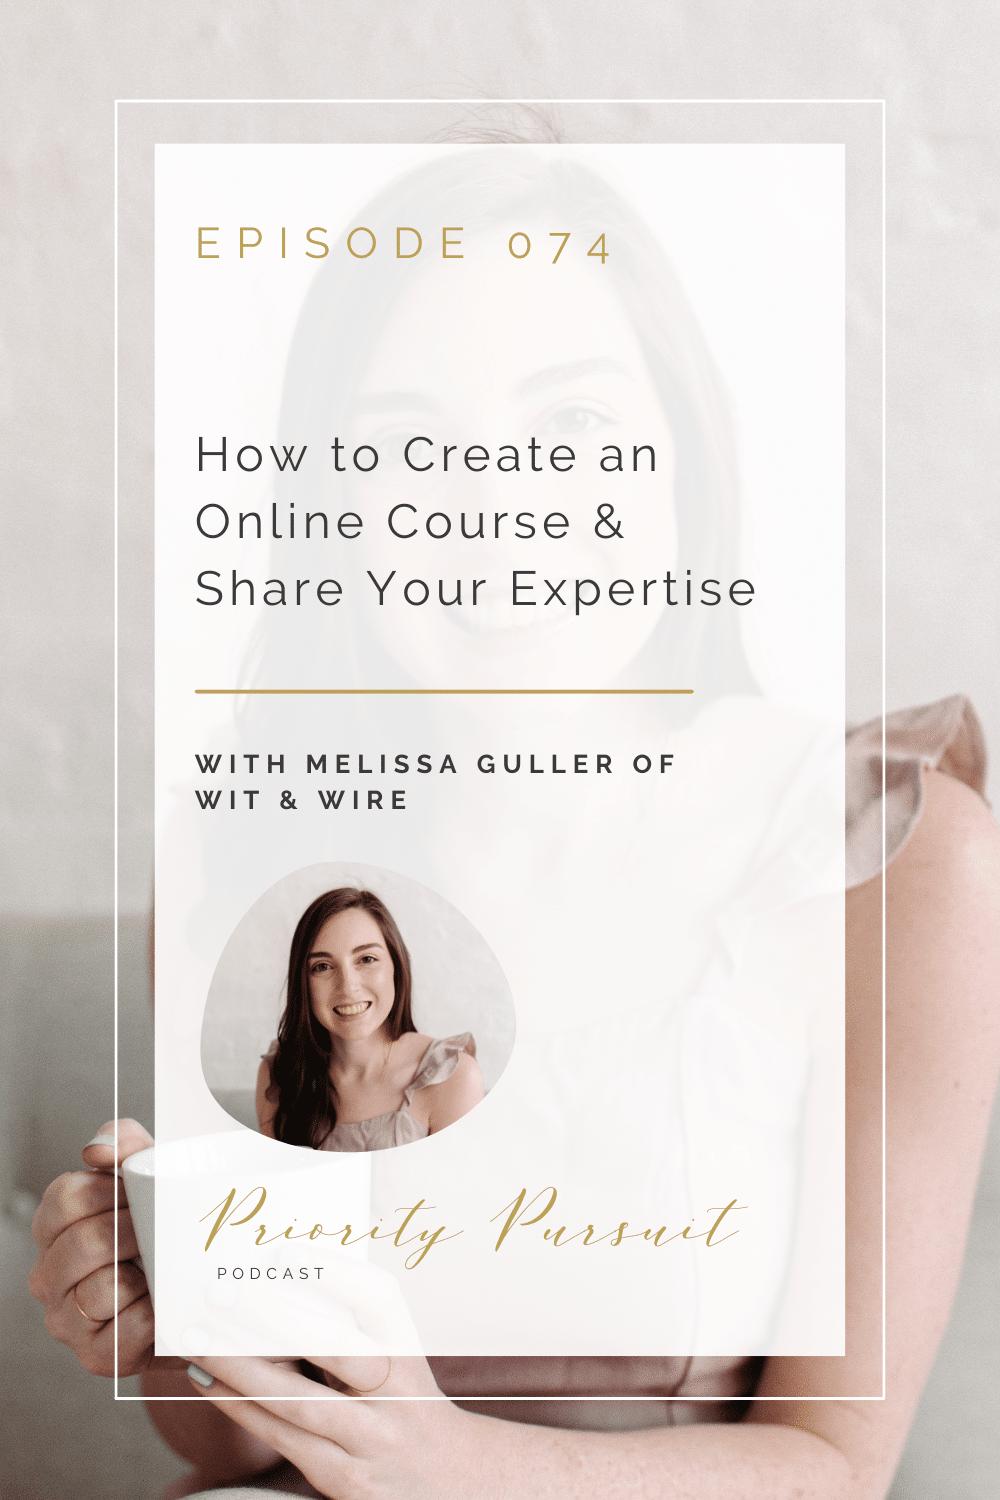 Victoria Rayburn and Melissa Guller discuss how to create an online course so creative entrepreneurs can share their expertise.